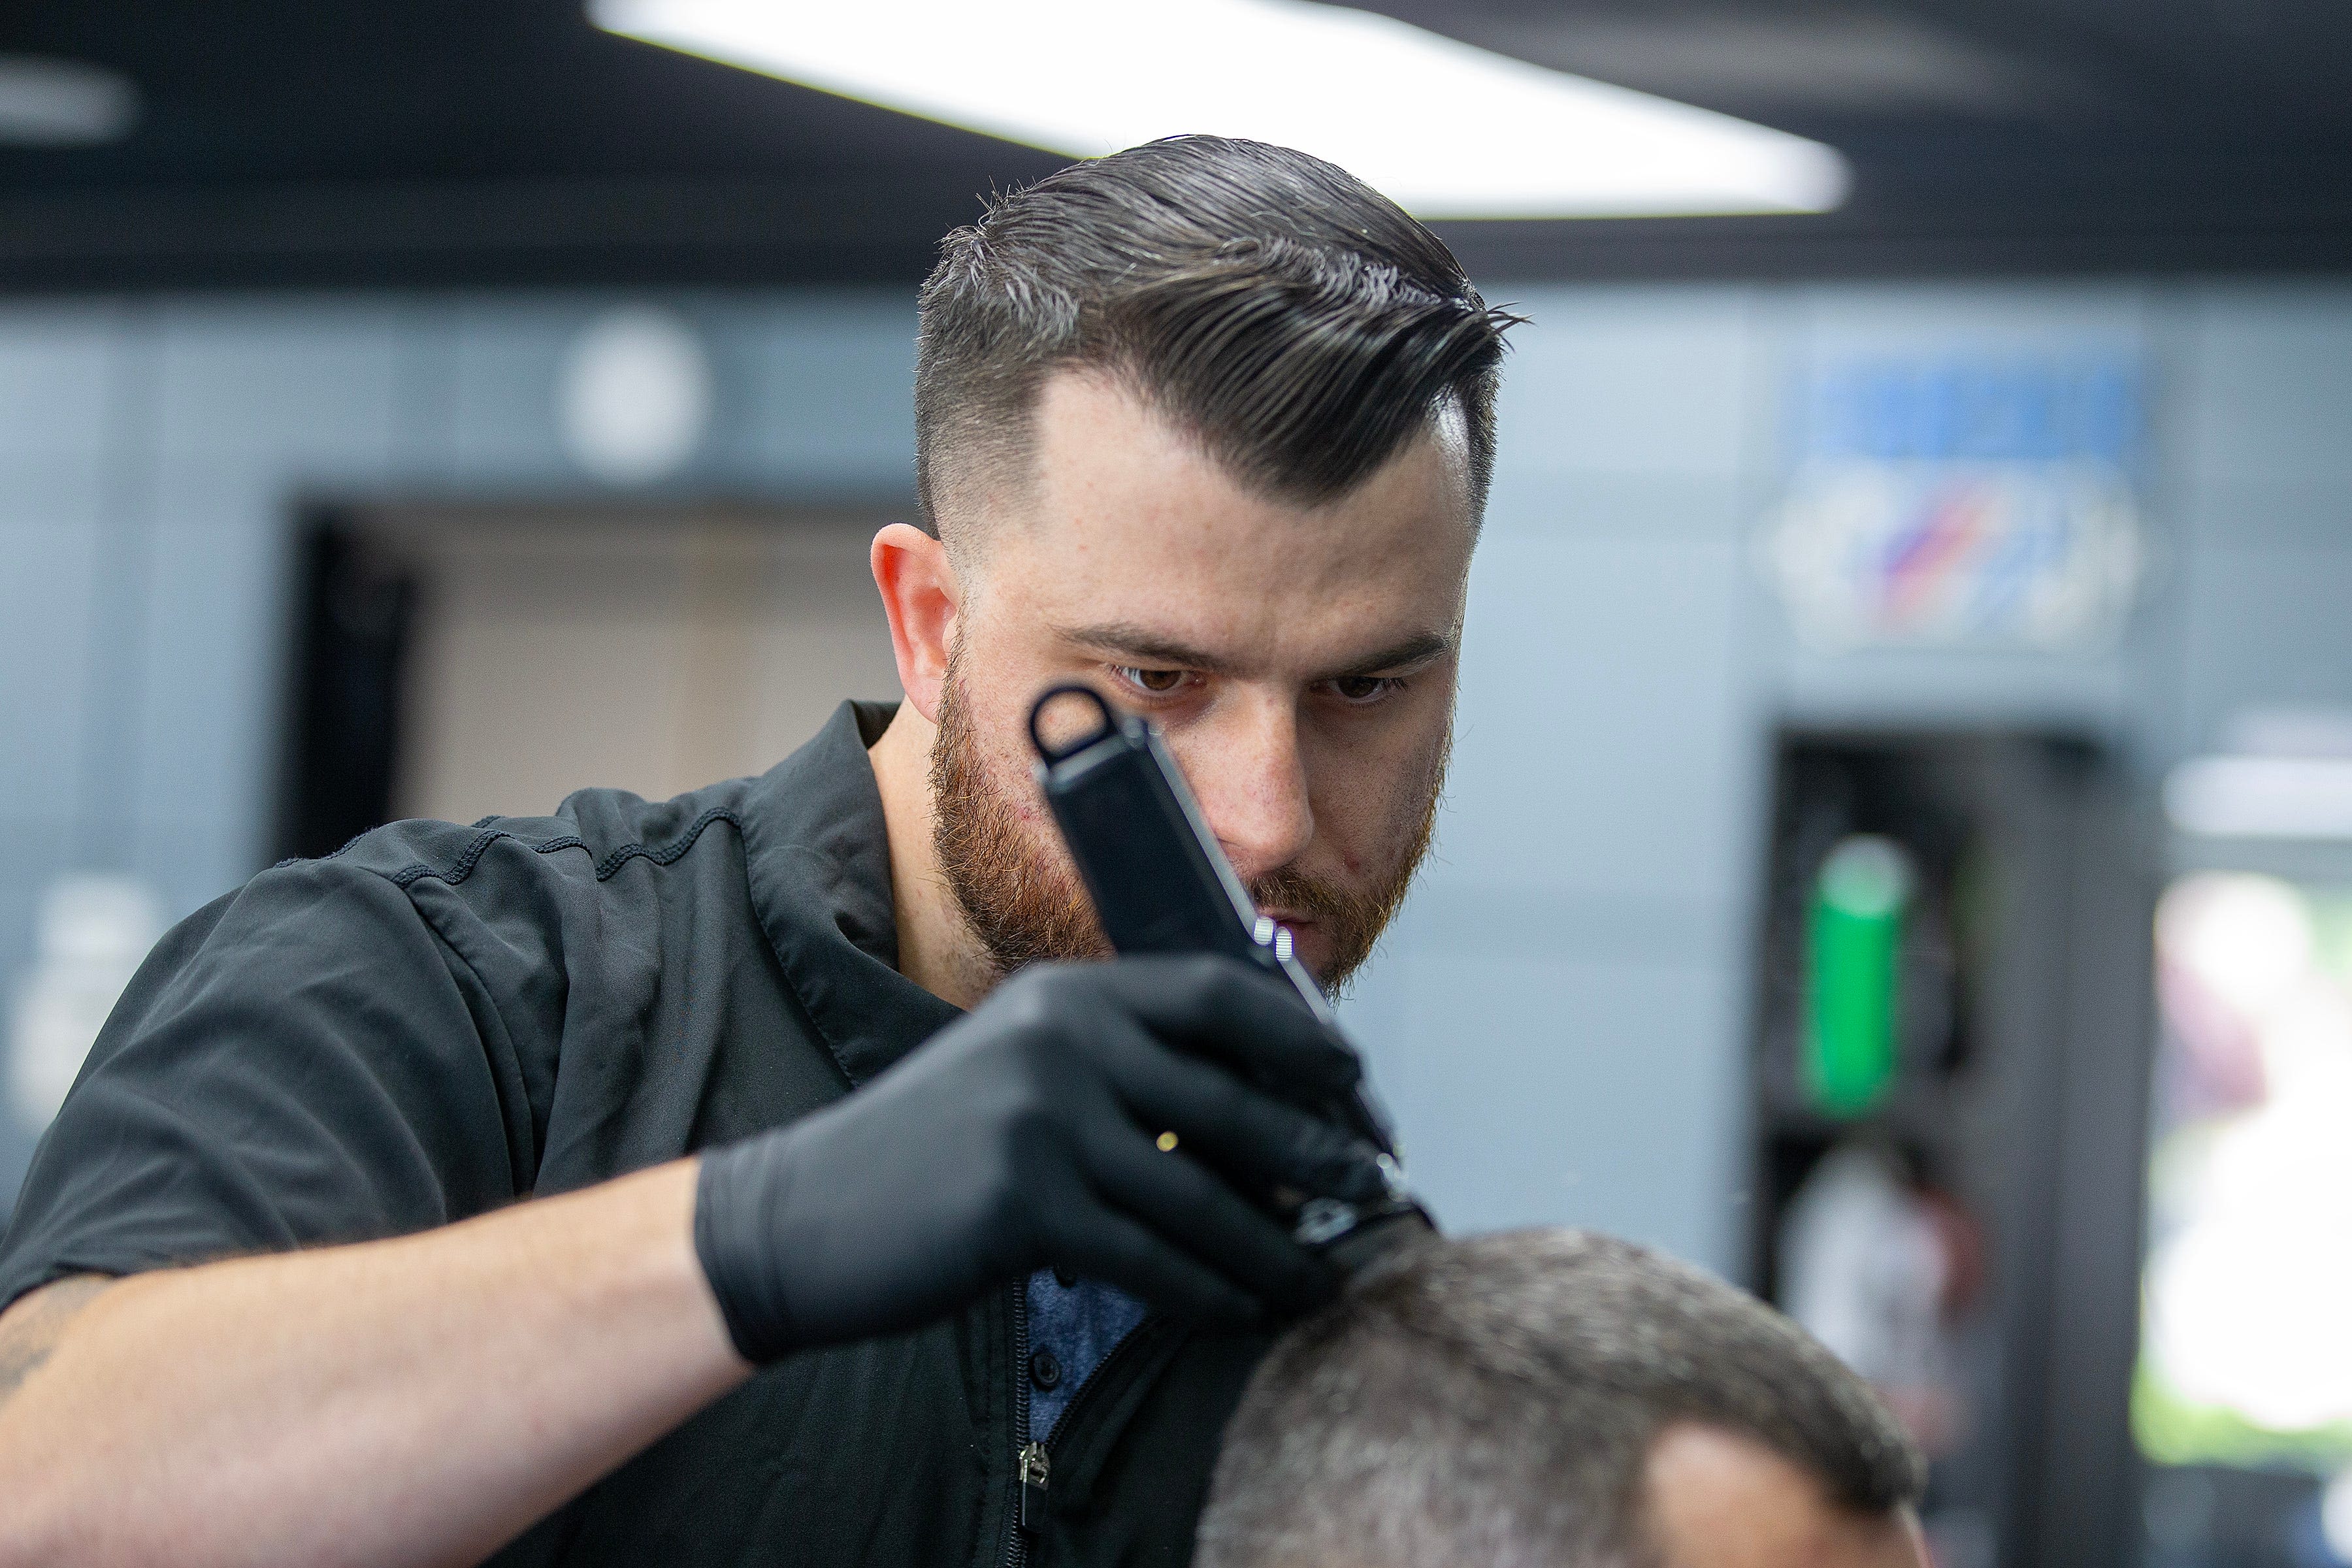 Fly Guys Barbershop in Middletown aims to be a place to hang out